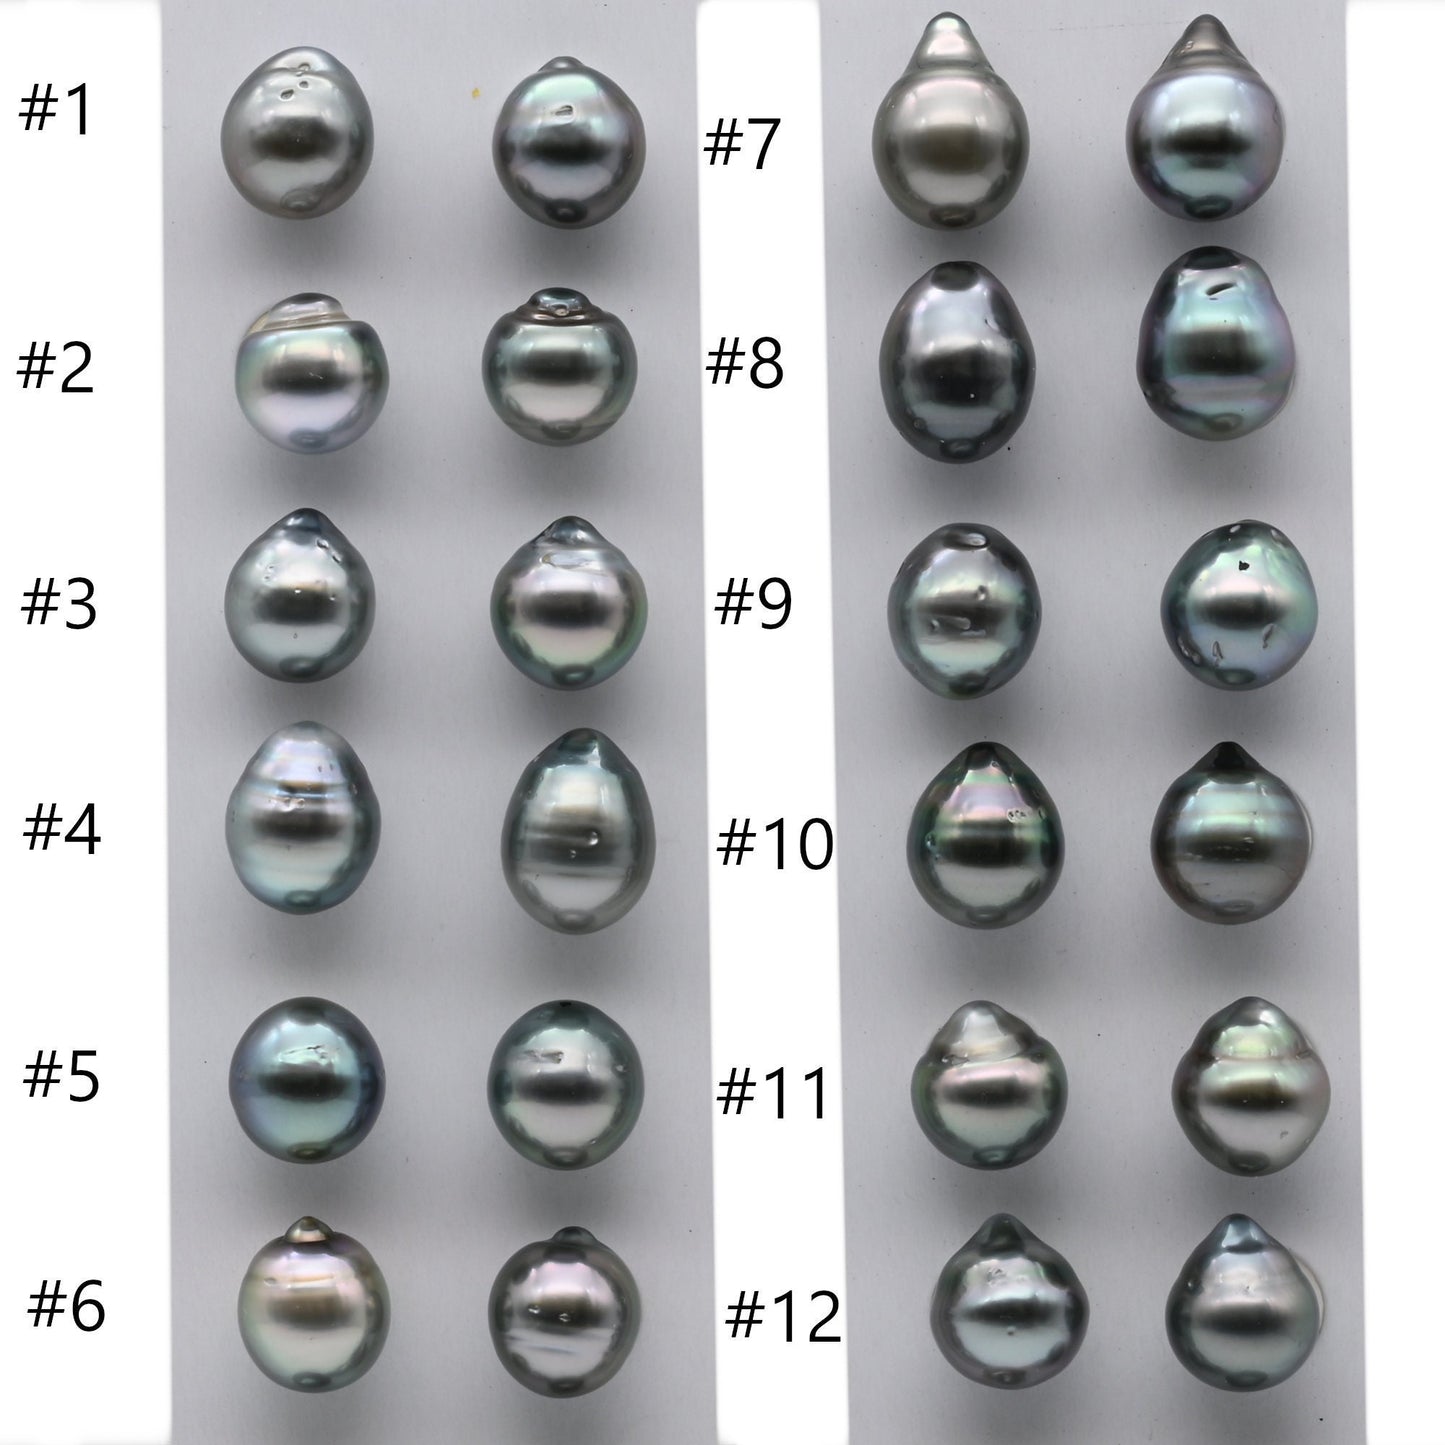 Teardrop Tahitian Pearl Pair Loose Undrilled, Light Color with Beautiful Luster and Blemish, 9.5-10mm, SKU# 1001TLP